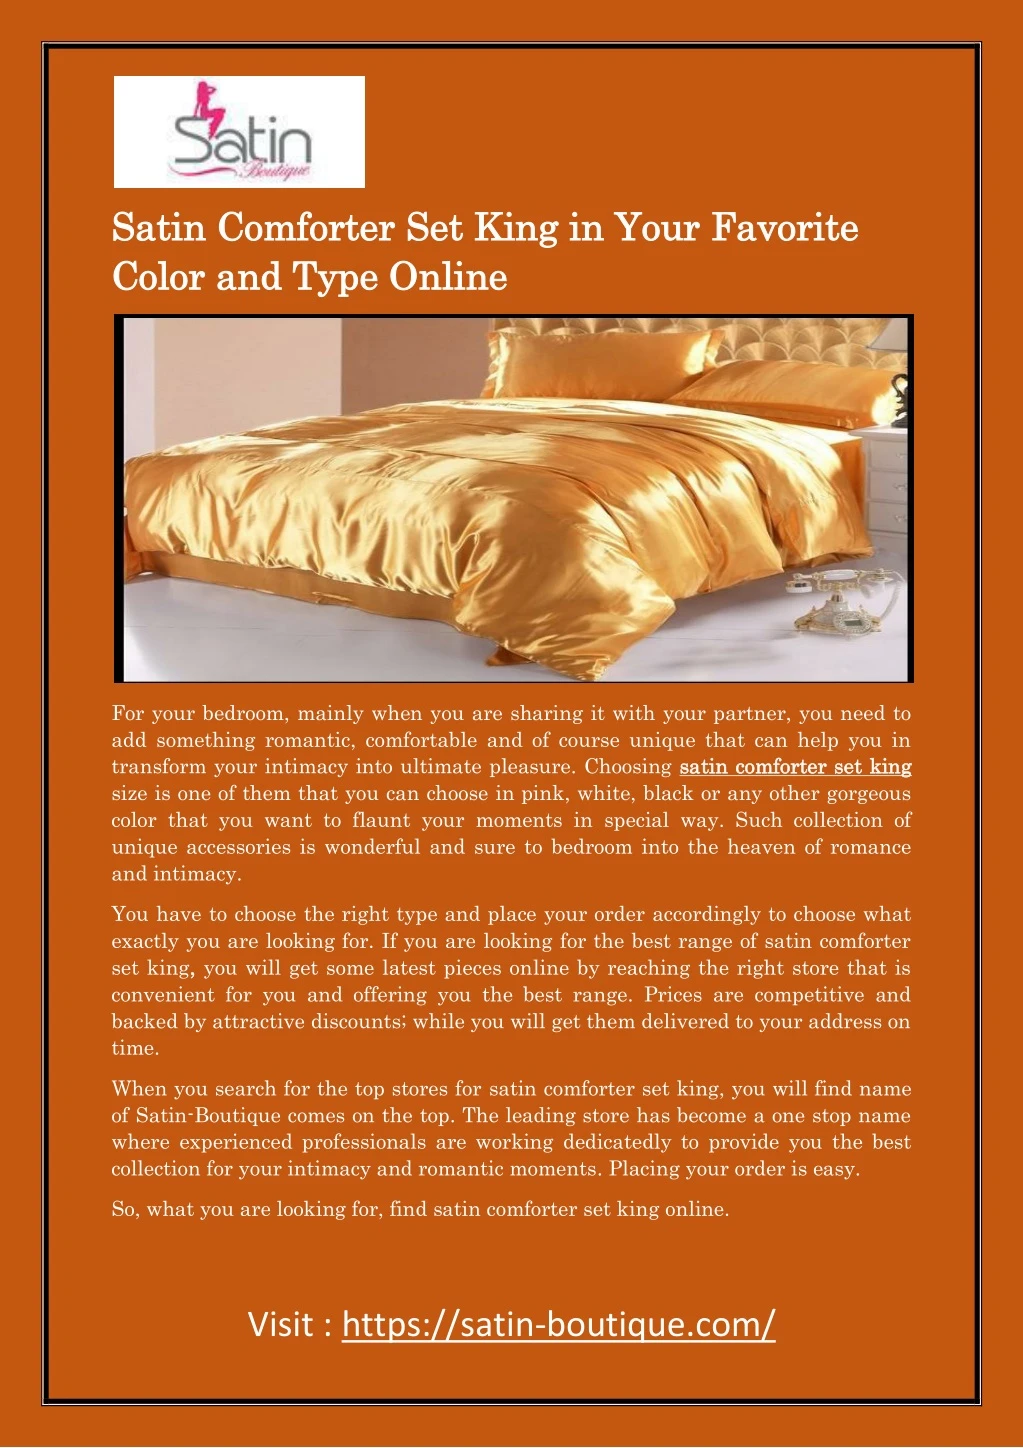 PPT - Satin Comforter Set King in Your Favorite Color and Type Online ...